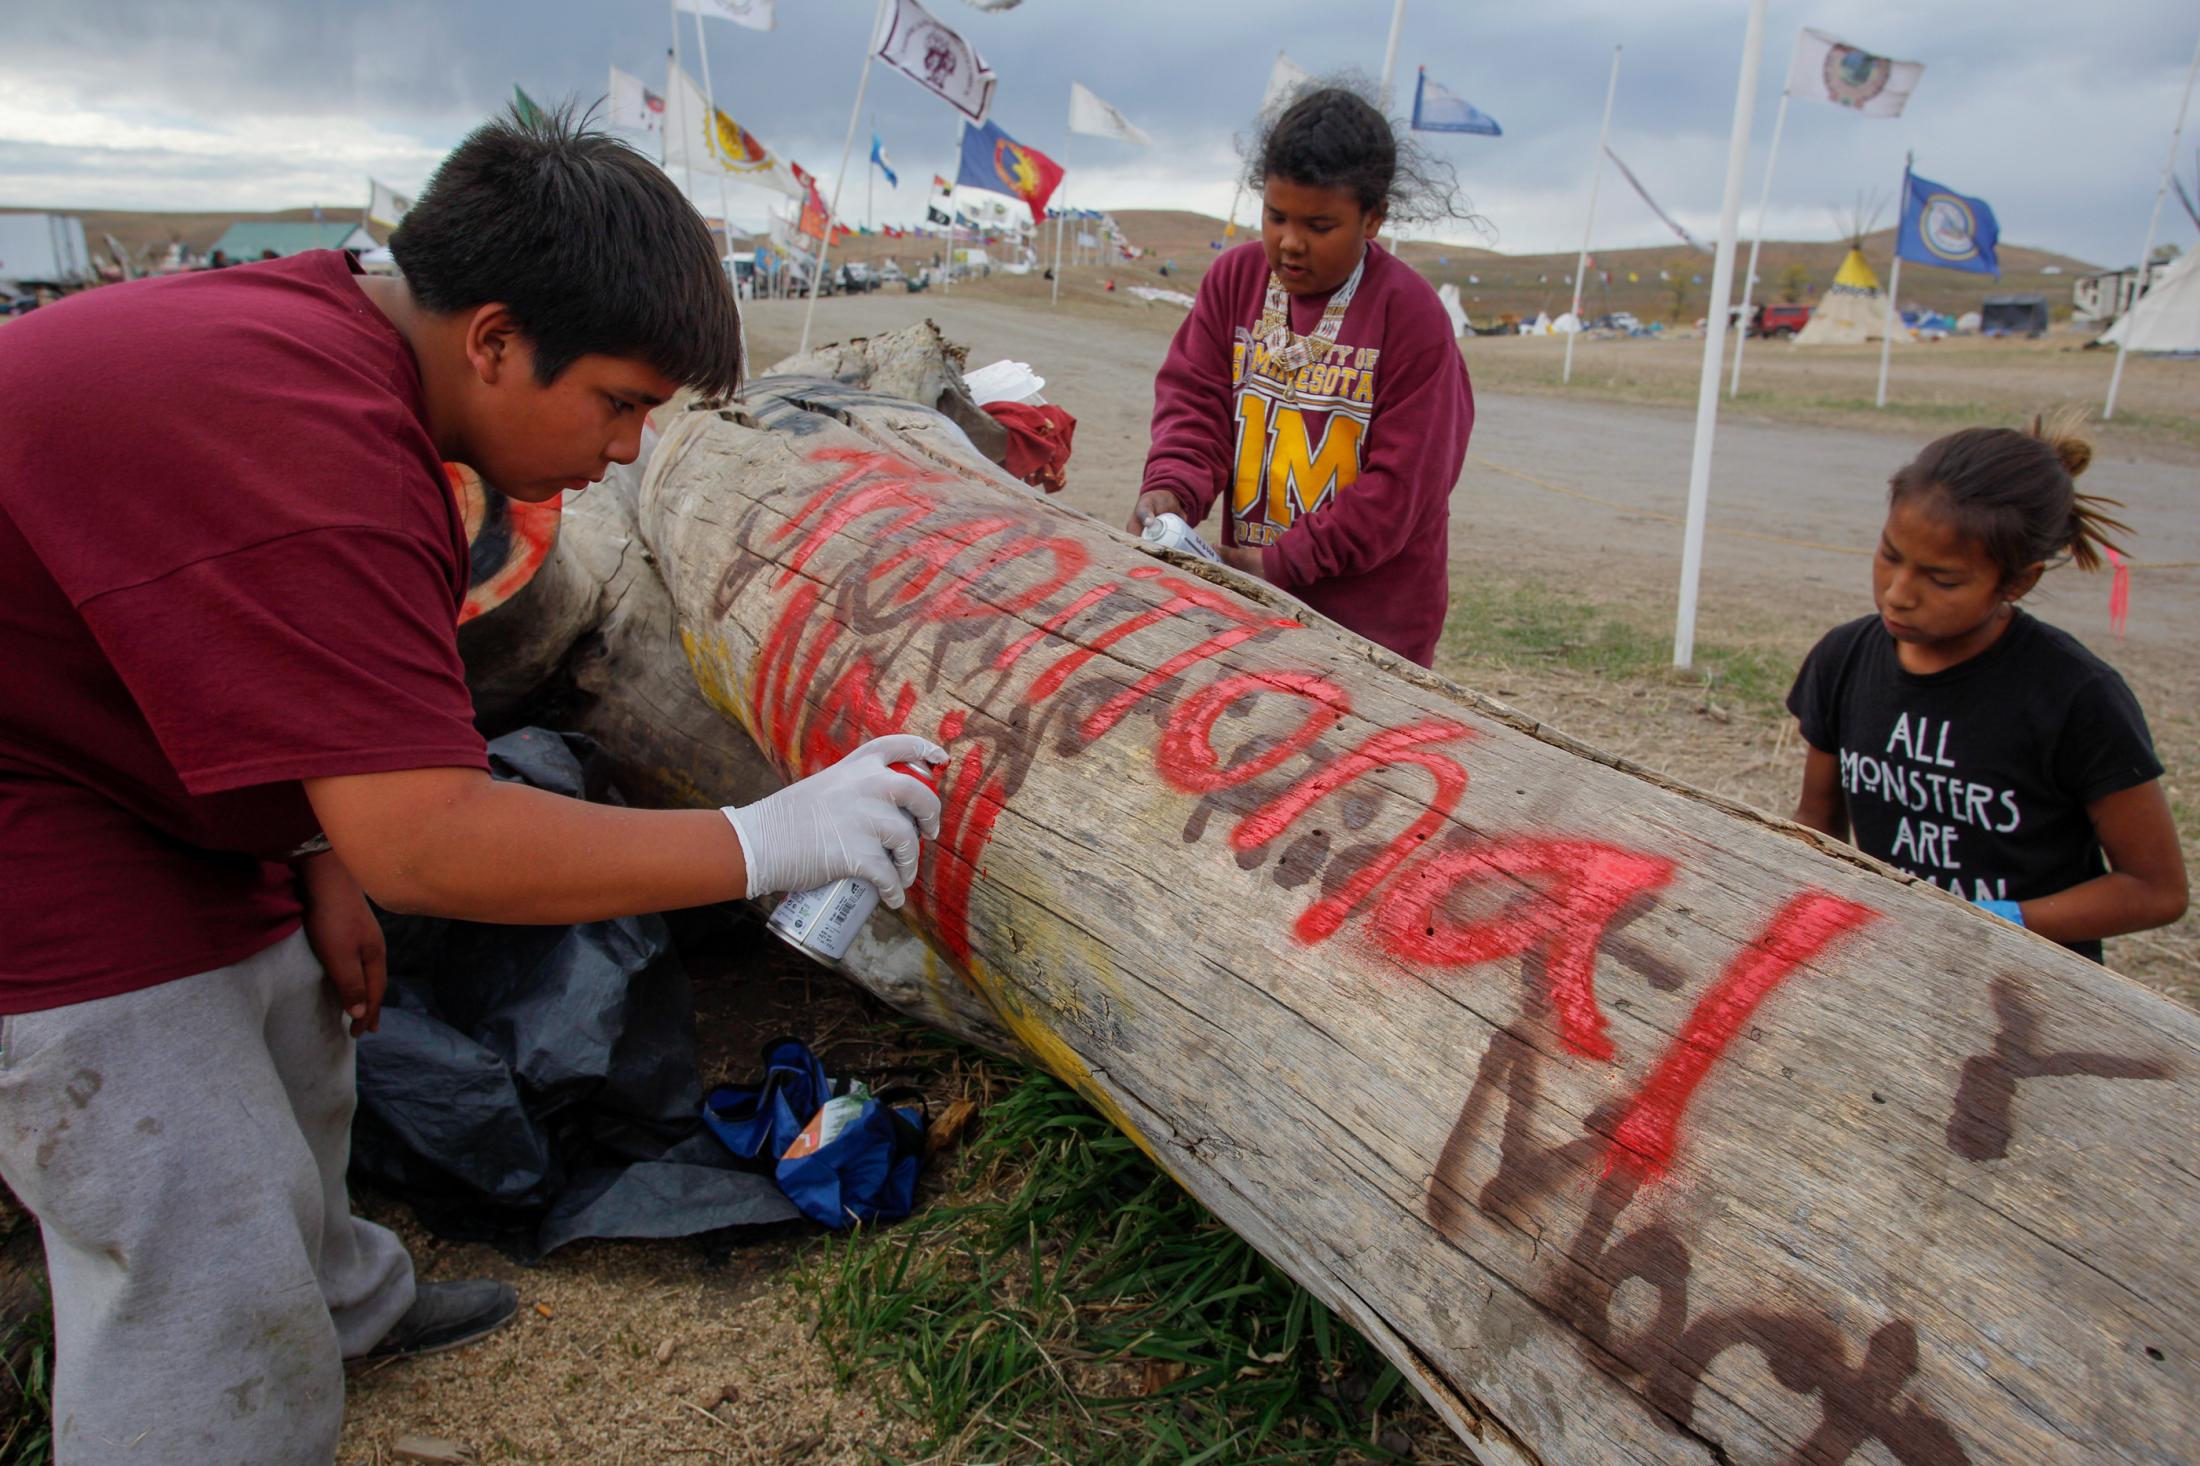 Decolonizing Water - From left to right: Hunter, 12, Rayna, 10, and Frankie,...